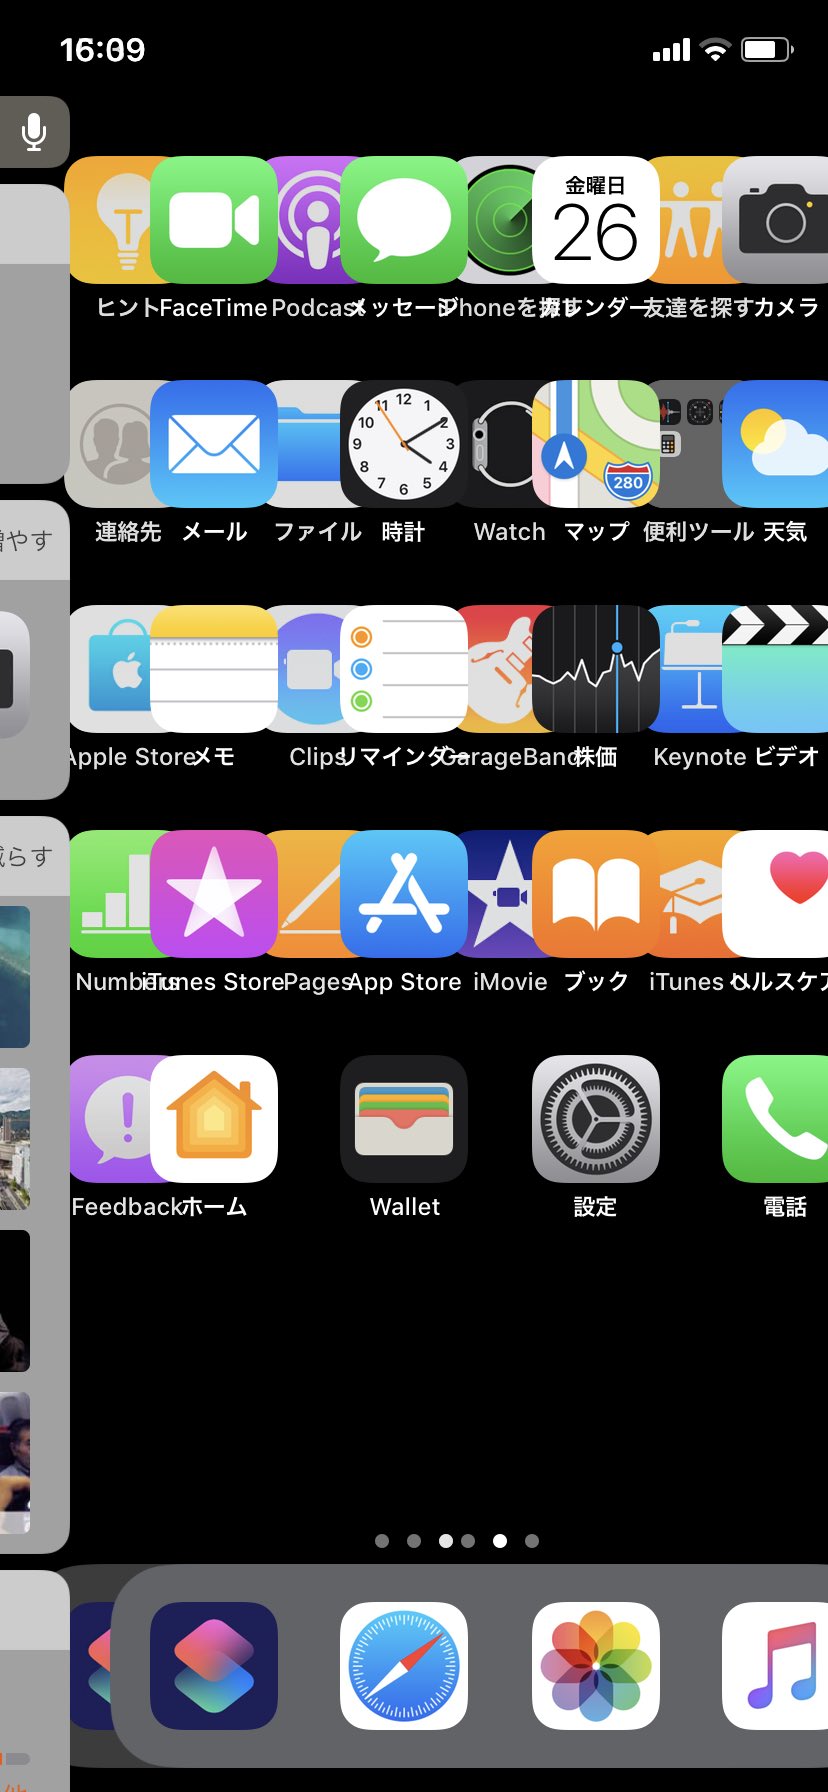 Hide Mysterious Iphone Wallpaper 不思議なiphone壁紙 Twitterissa Iphone Xrの壁紙サイズとポジション特定しました I Specified Wallpaper Size And Position Of Iphone X